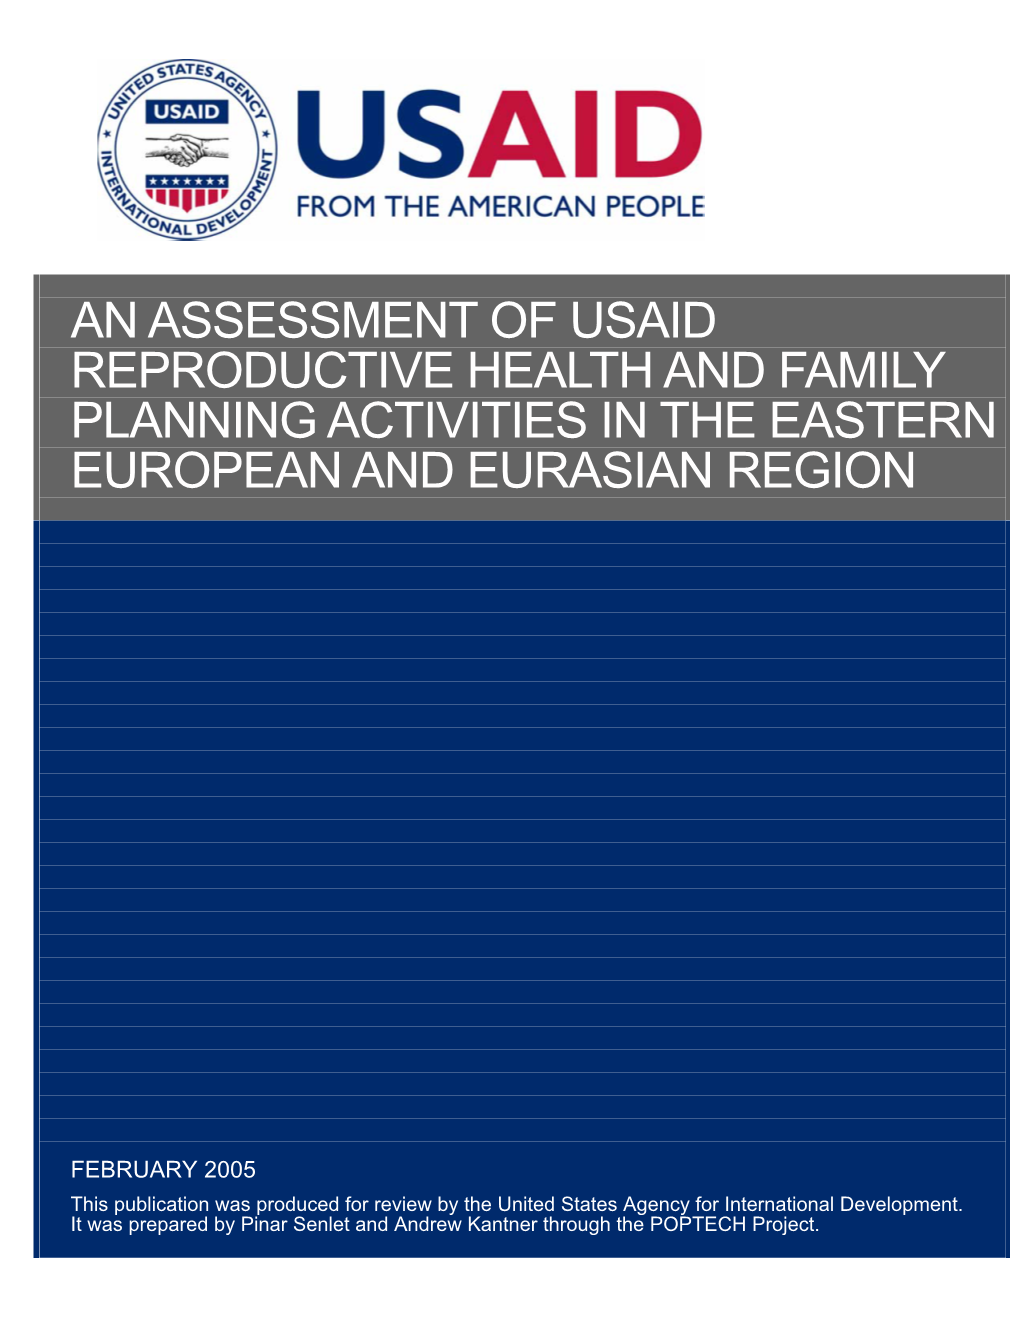 Assessment of USAID RH/FP Activities in the E&E Region